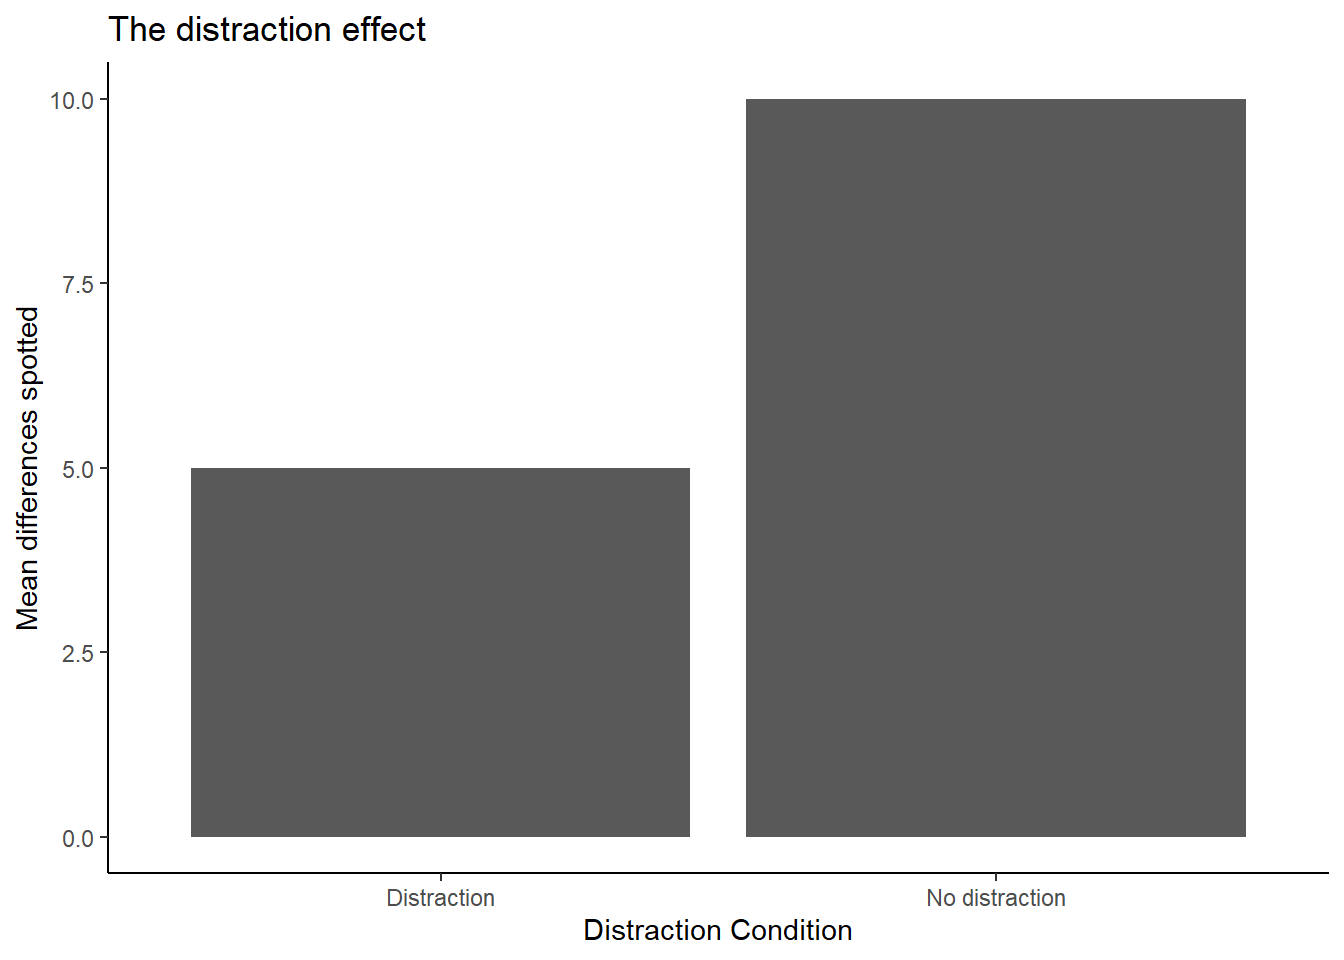 Example data from pretend experiment showing number of differences spotted in a distraction versus no distraction condition